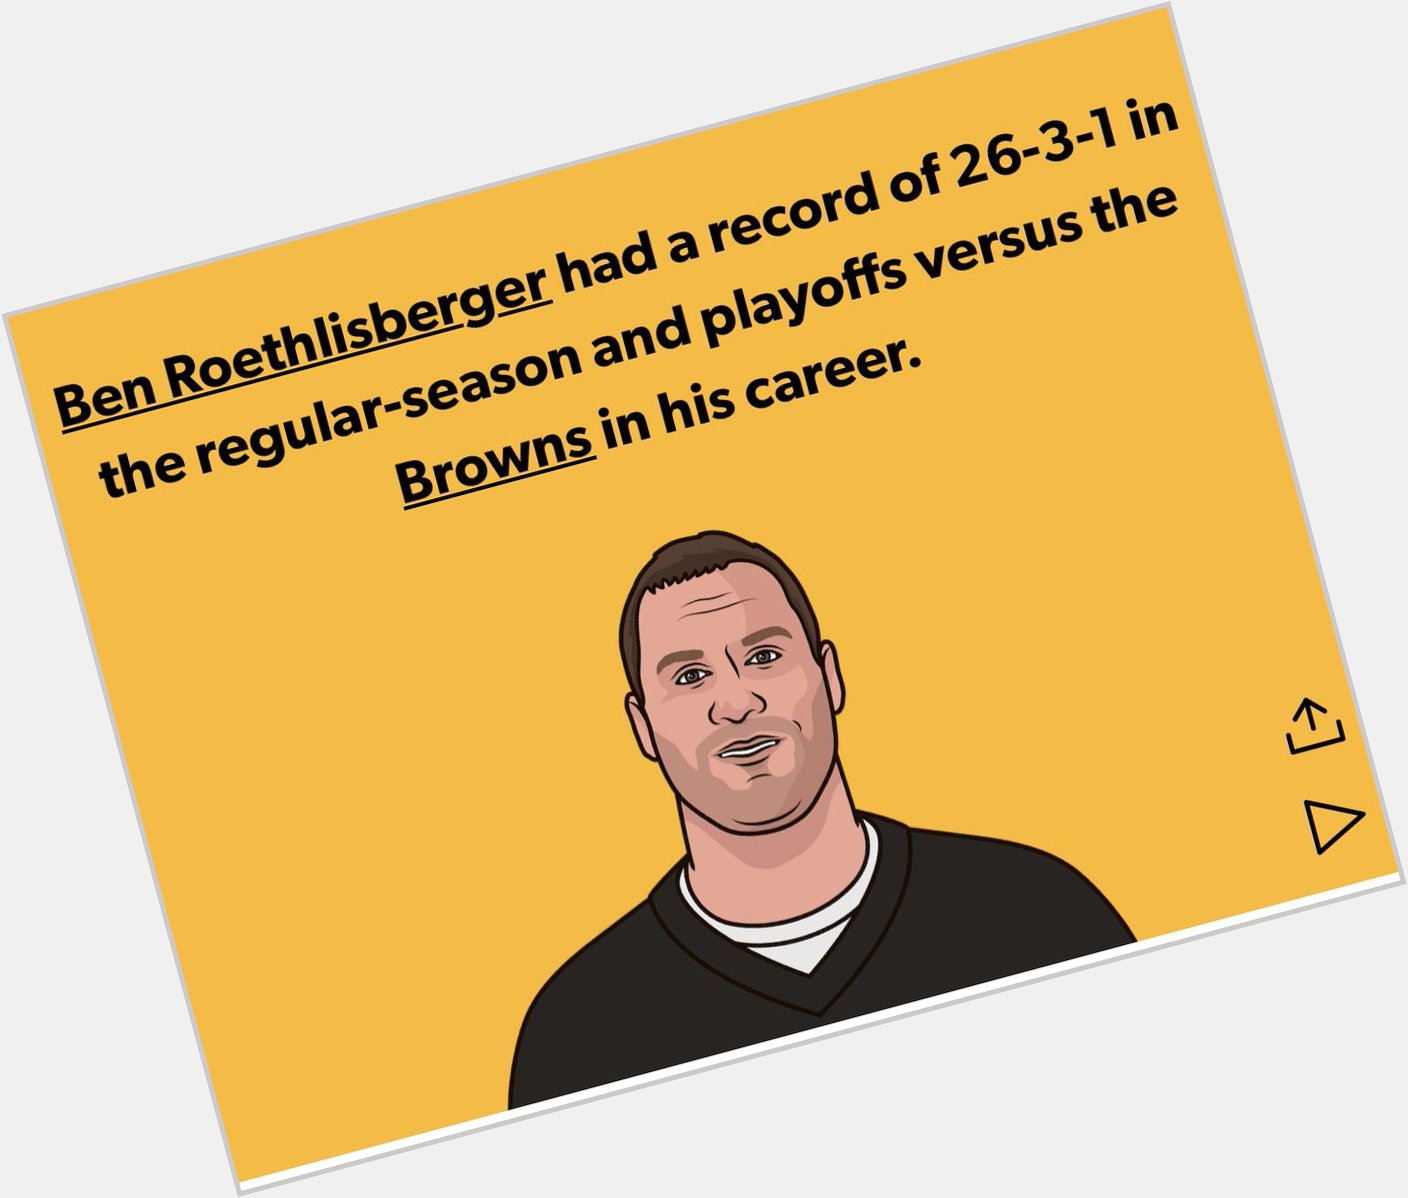  Happy Birthday to the owner of the Cleveland Browns, Big Ben Roethlisberger 